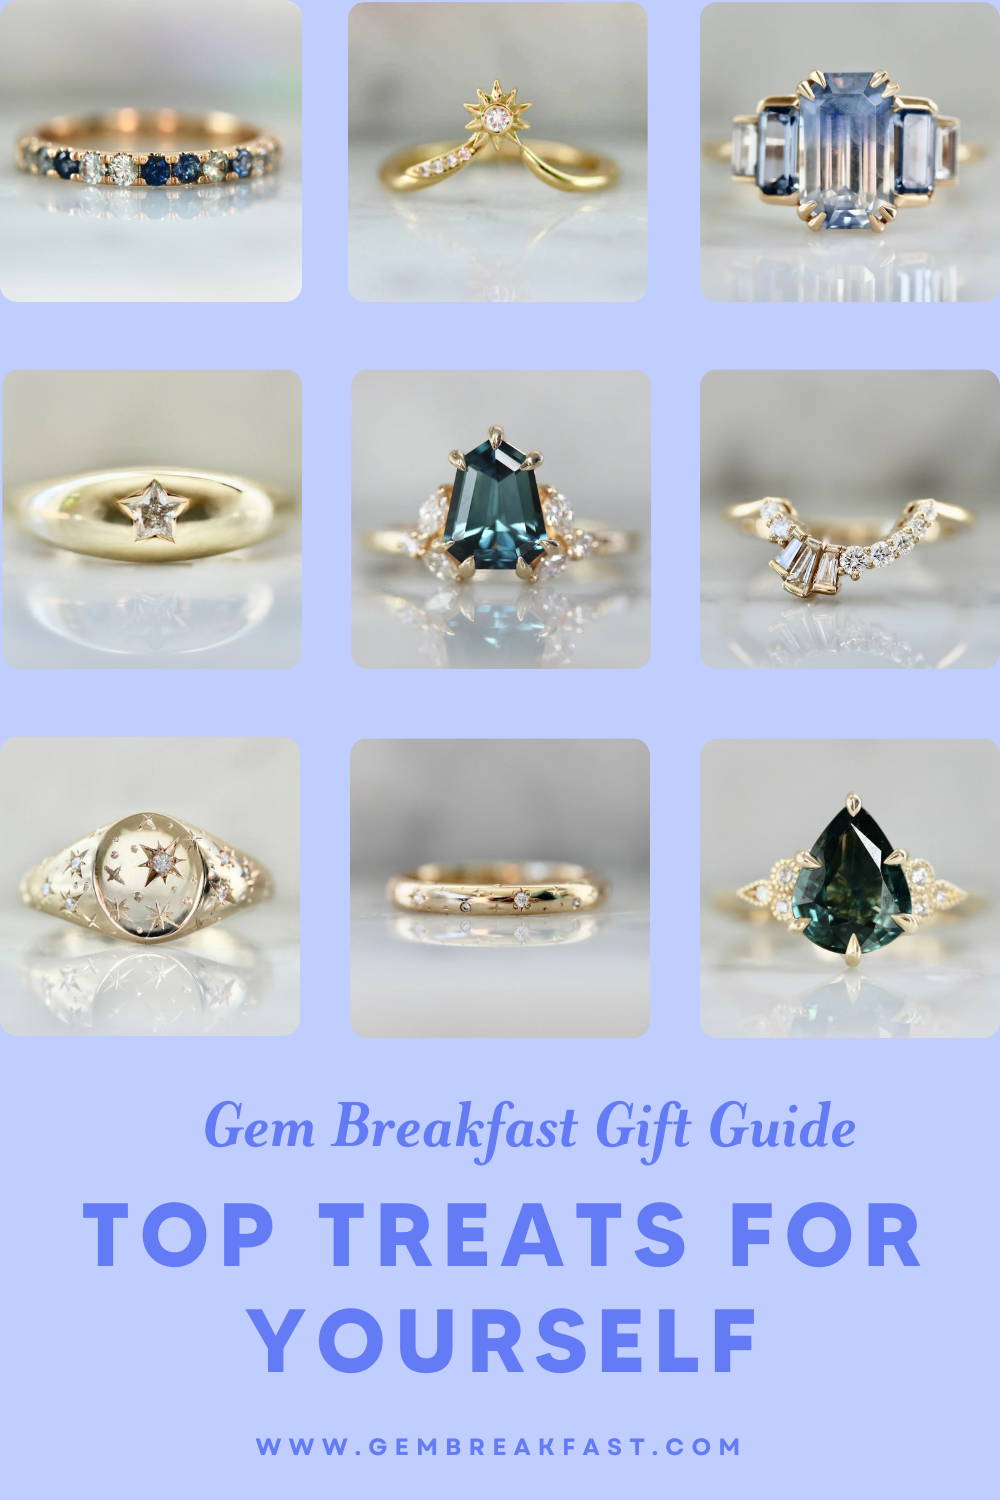 gem breakfast gift guide - top treats for yourself